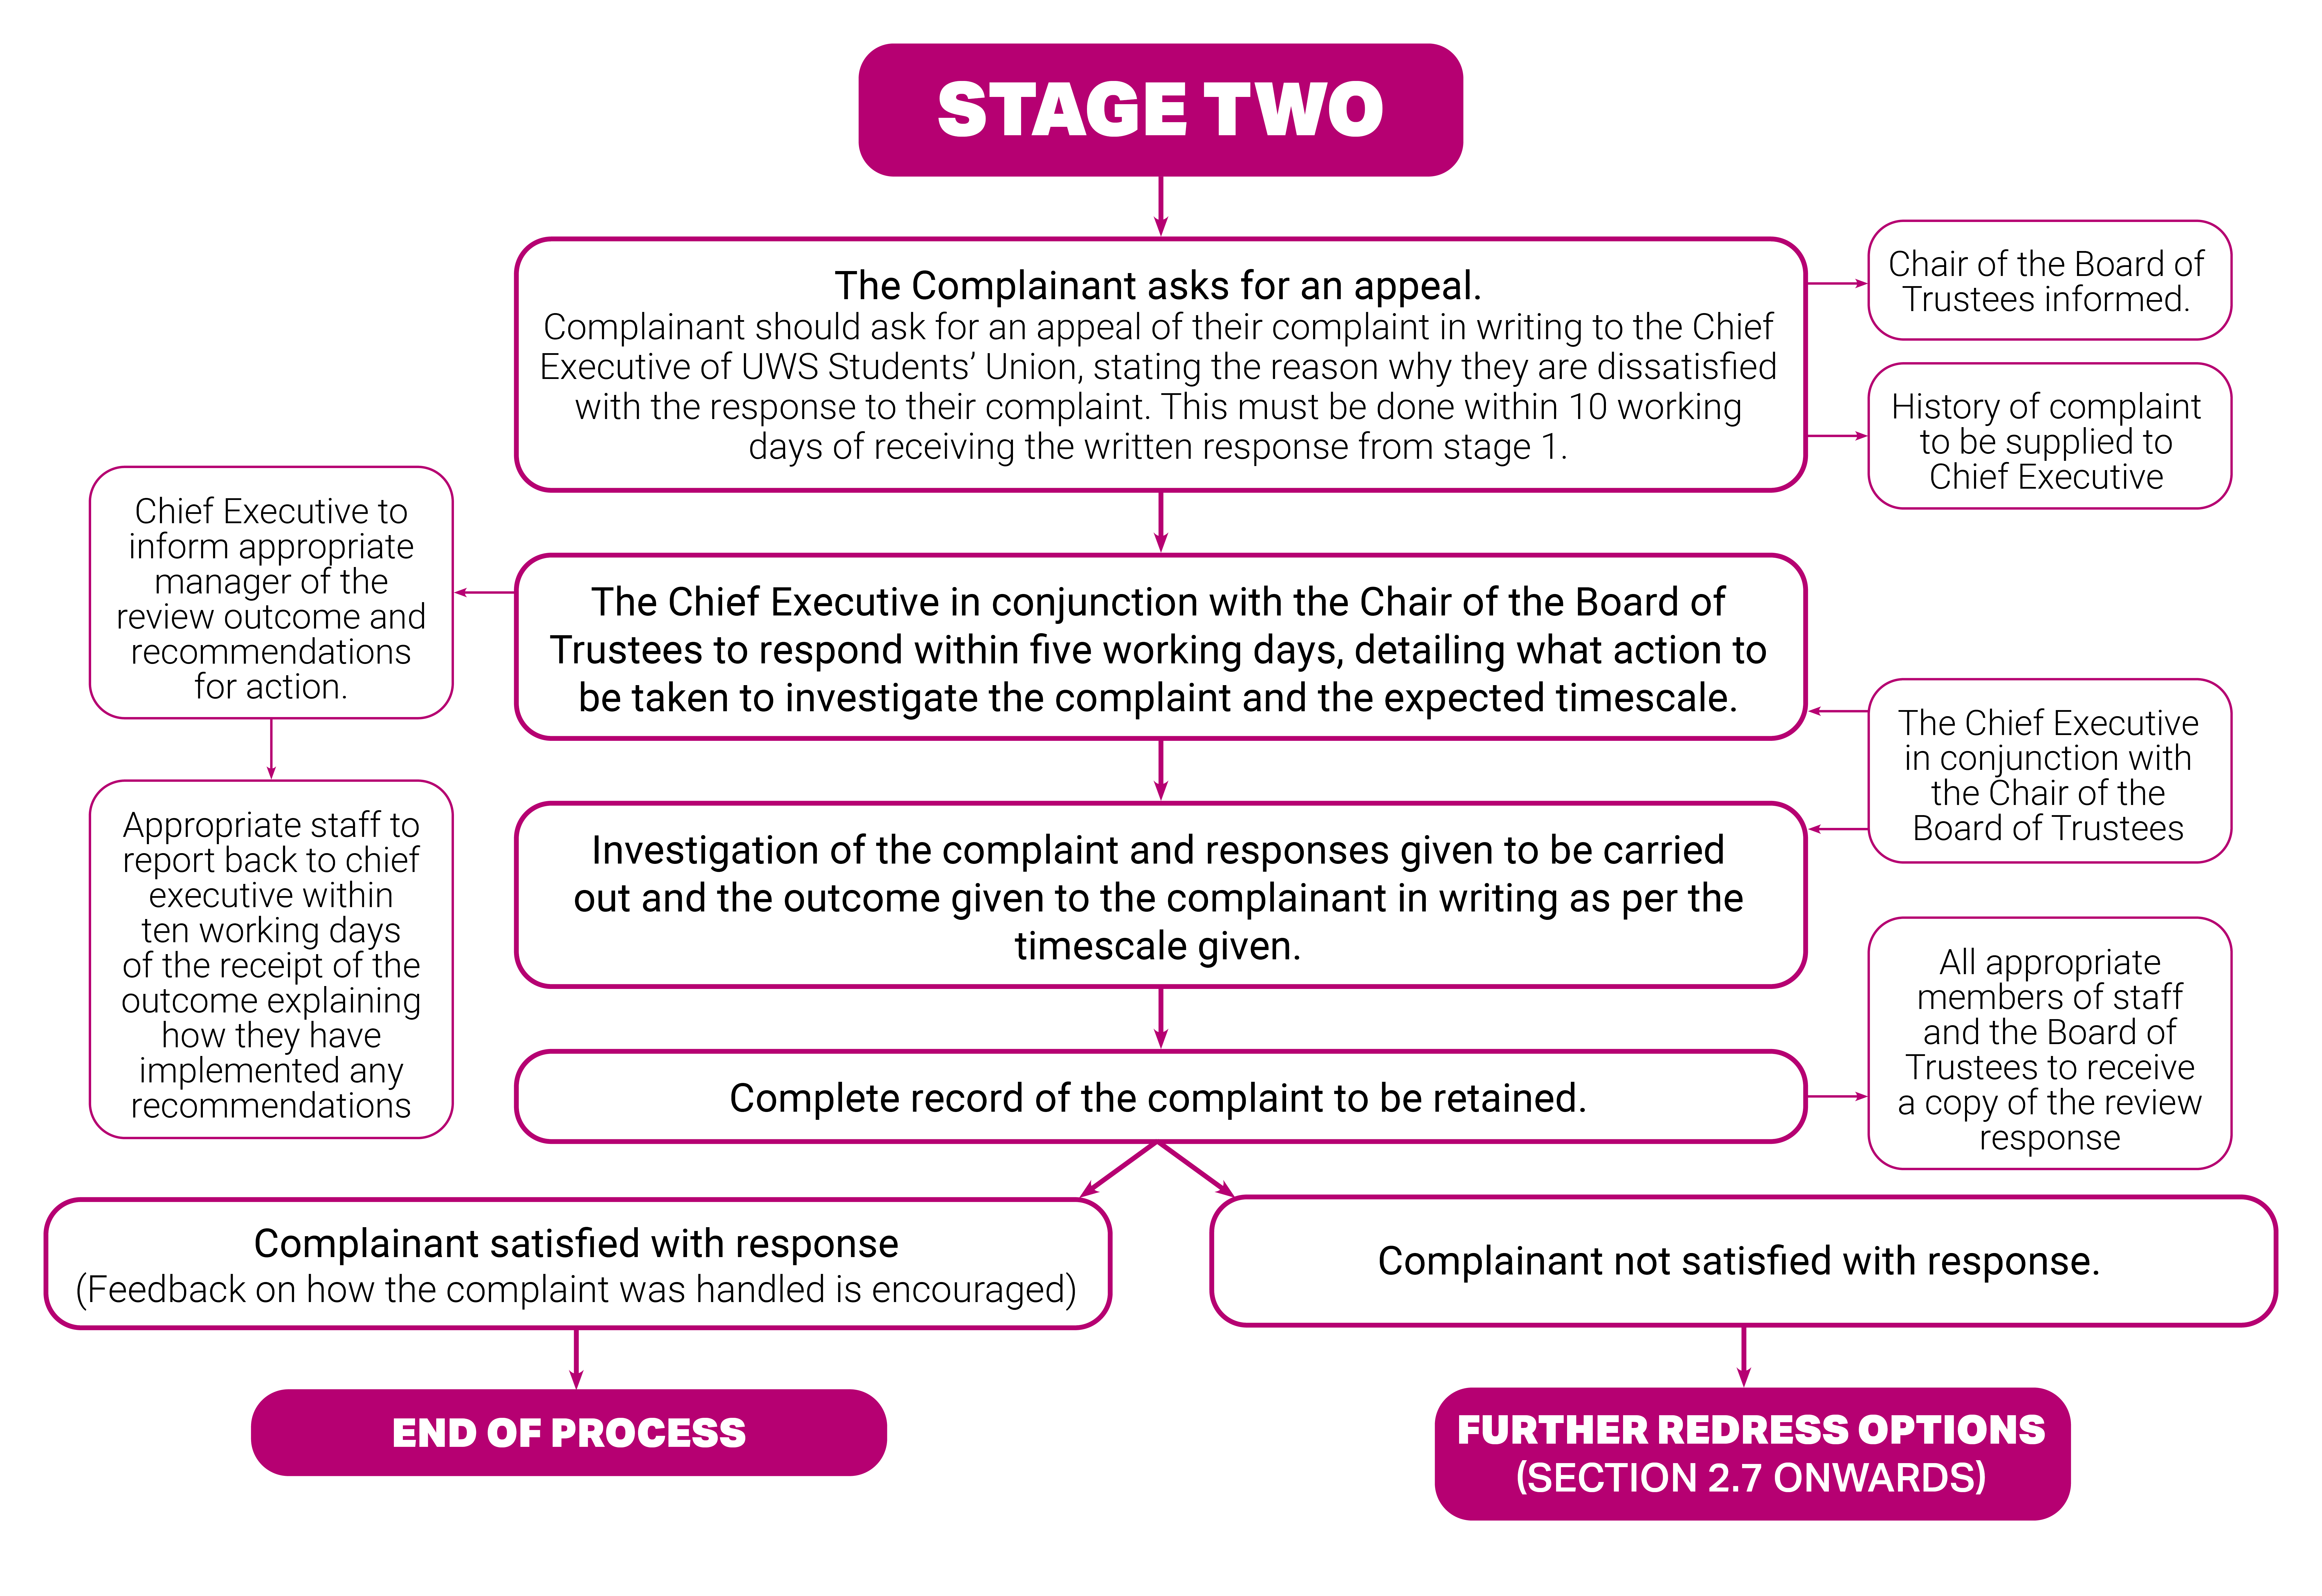 Flowchart showing Stage Two of the complaints procedure. Step 1, The Complainant asks for an appeal. Complainant should ask for an appeal of their complaint in writing to the Chief Executive of UWS Students’ Union, stating the reason why they are dissatisfied with the response to their complaint. This must be done within 10 working days of receiving the written response from stage 1. Chair of the Board of Trustees informed and history of complaint to be supplied to Chief Executive. Step 2, The Chief Executive in conjunction with the Chair of the Board of Trustees to respond within five working days, detailing what action to be taken to investigate the complaint and the expected timescale. Chief Executive to inform appropriate manager of the review outcome and recommendations for action. Appropriate staff to report back to chief executive within ten working days of the receipt of the outcome explaining how they have implemented any recommendations. Step 3, Investigation of the complaint and responses given to be carried out and the outcome given to the complainant in writing as per the timescale given. This step and step 2 takes place by the Chief Executive in conjunction with the Chair of the Board of Trustees. Step 4, Complete record of the complaint to be retained. All appropriate members of staff and the Board of Trustees to receive a copy of the review response. If the complainant satisfied with response (Feedback on how the complaint was handled is encouraged) then the process is ended. If the complainant is not satisfied with the response, they have further redress options as outlined in section 2.7 onwards.